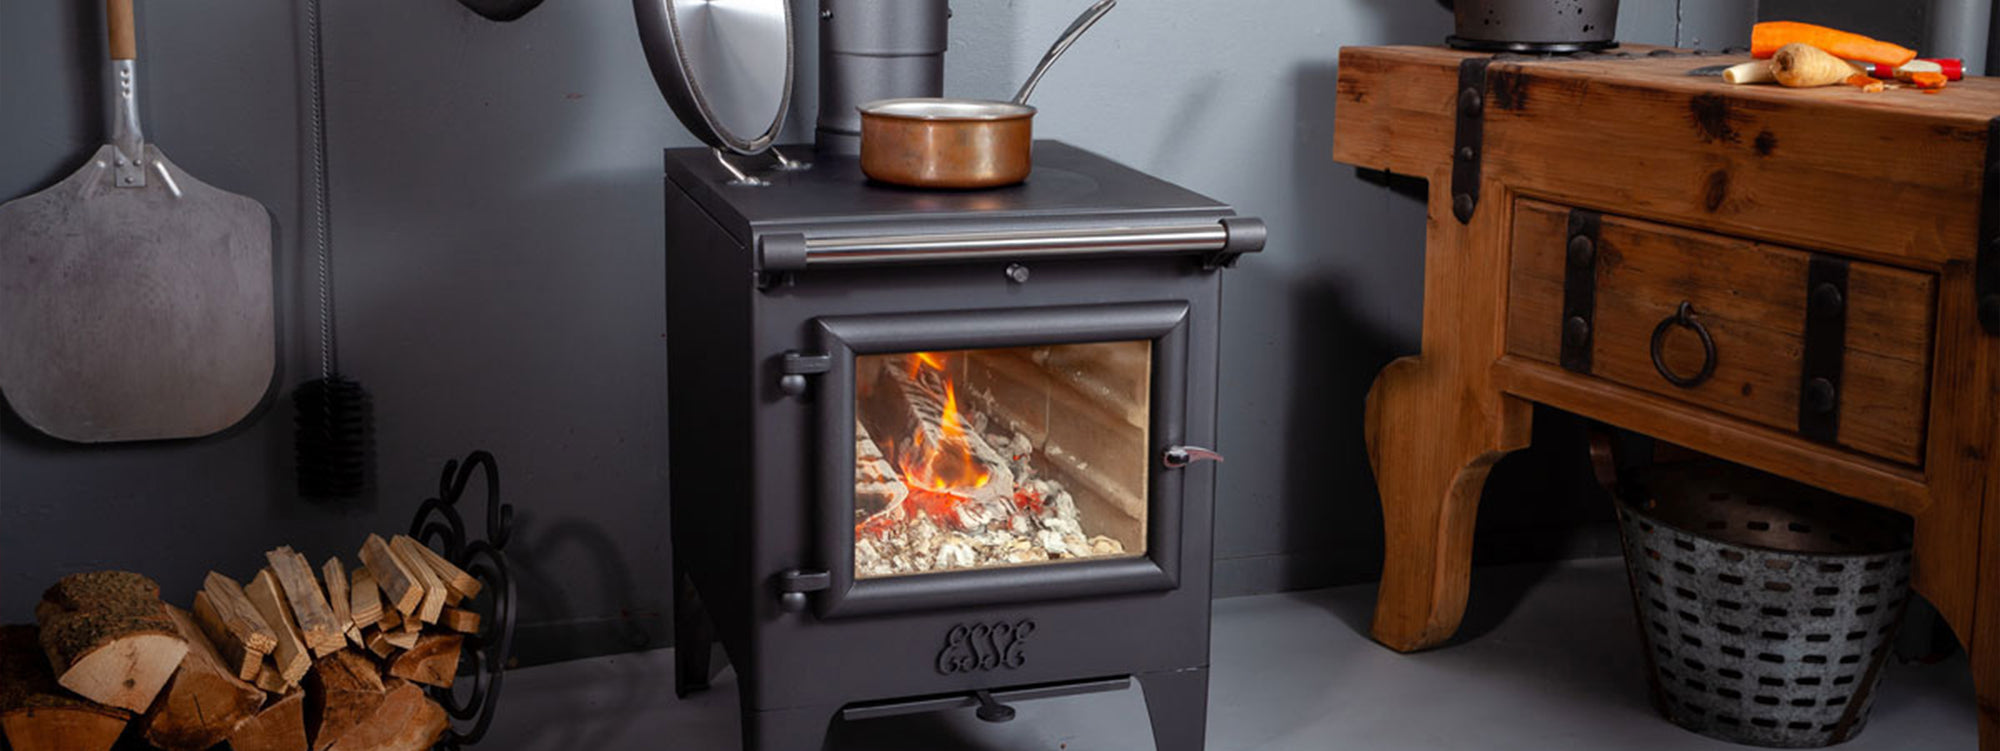 Installation of your new stove